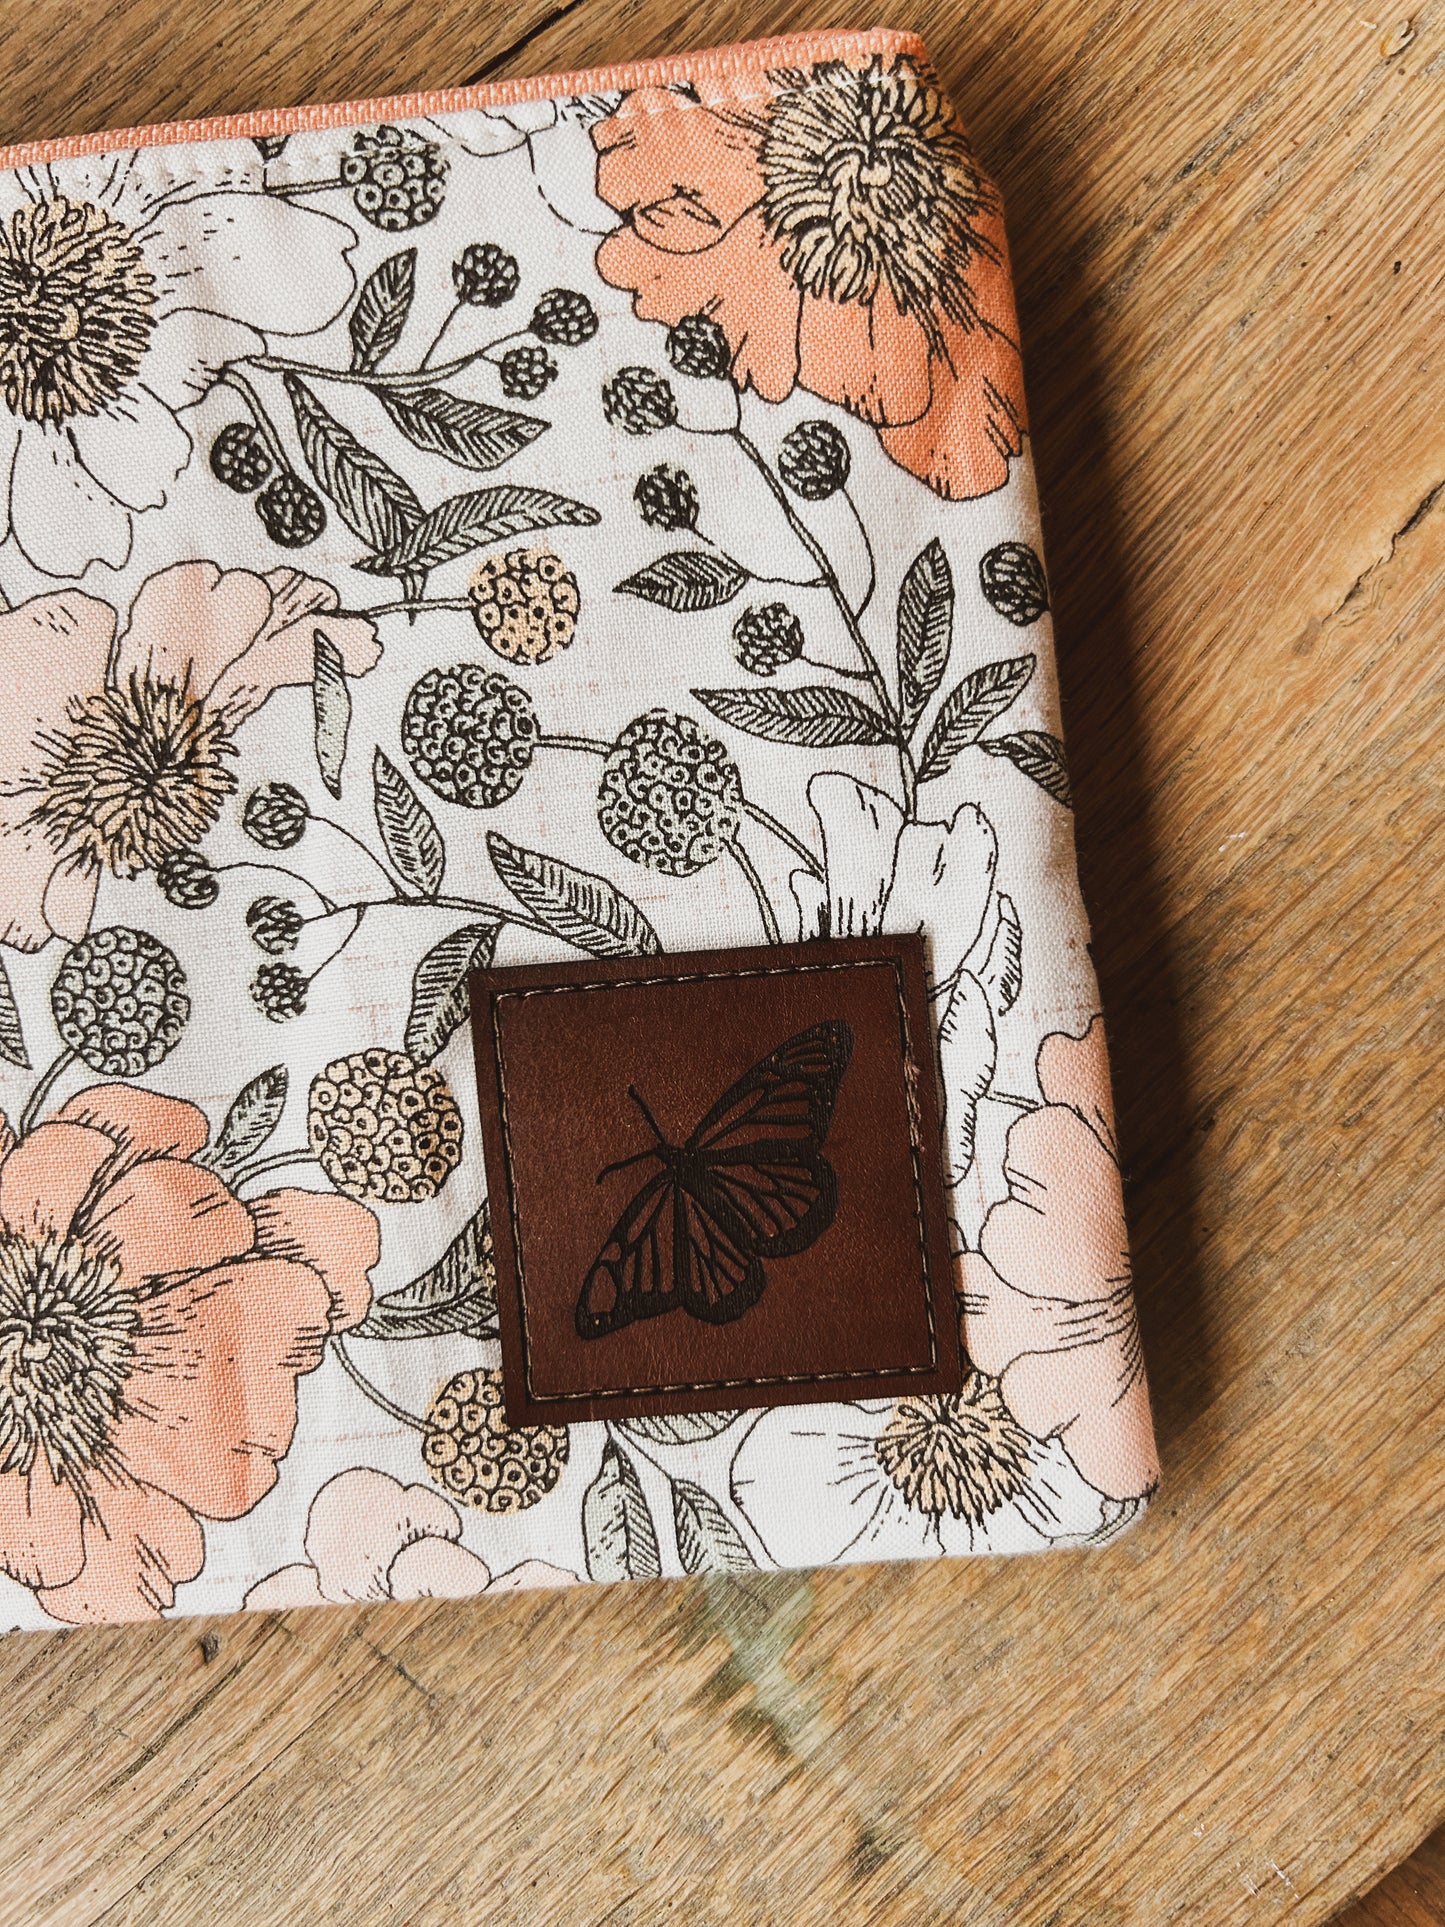 Sewable Leather Patches - Floral